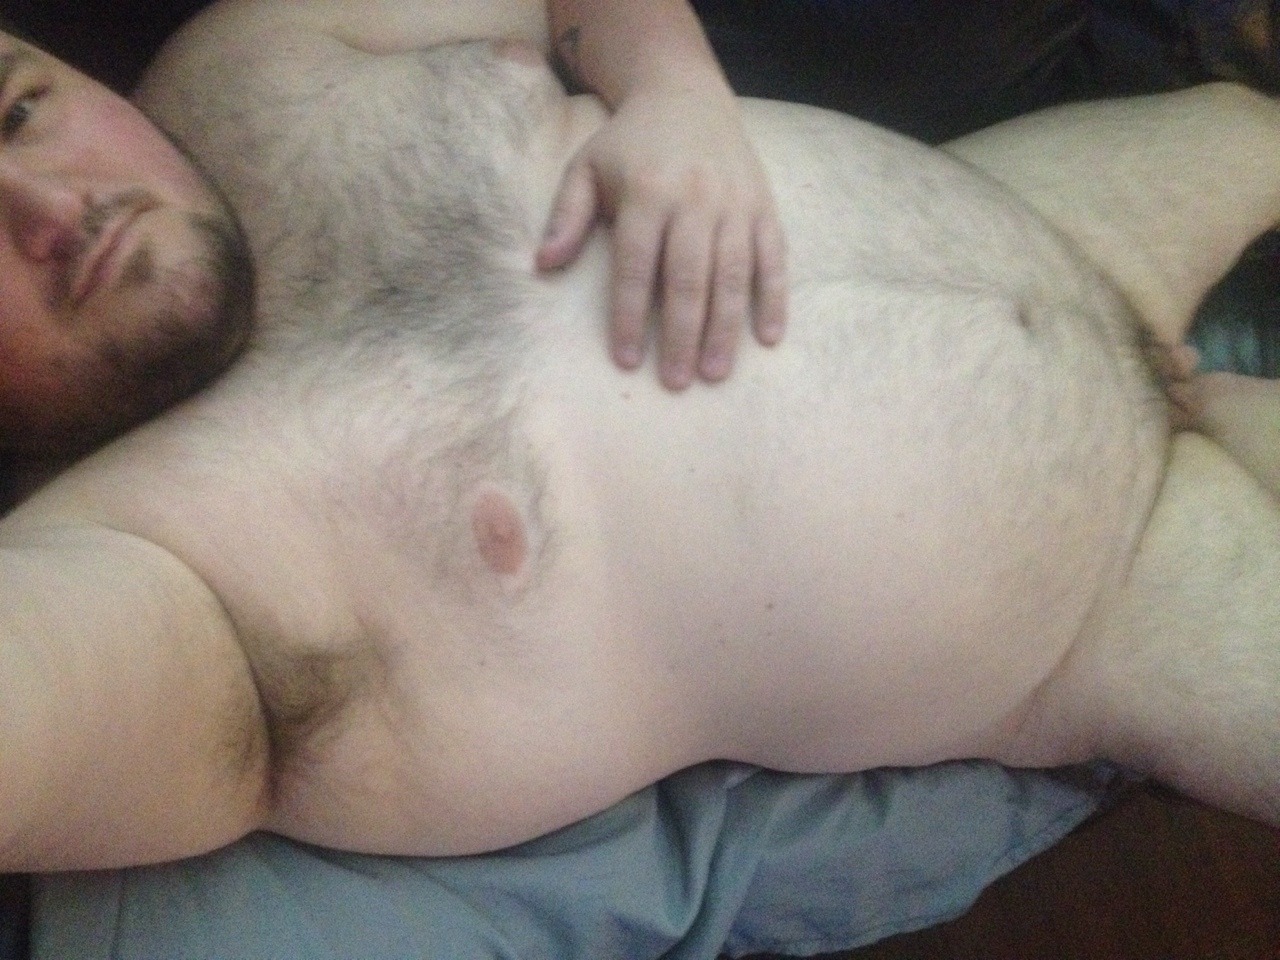 gulobear:  chubbyaddiction:  bigc-kc52:  This is what I do on my time alone. Naked